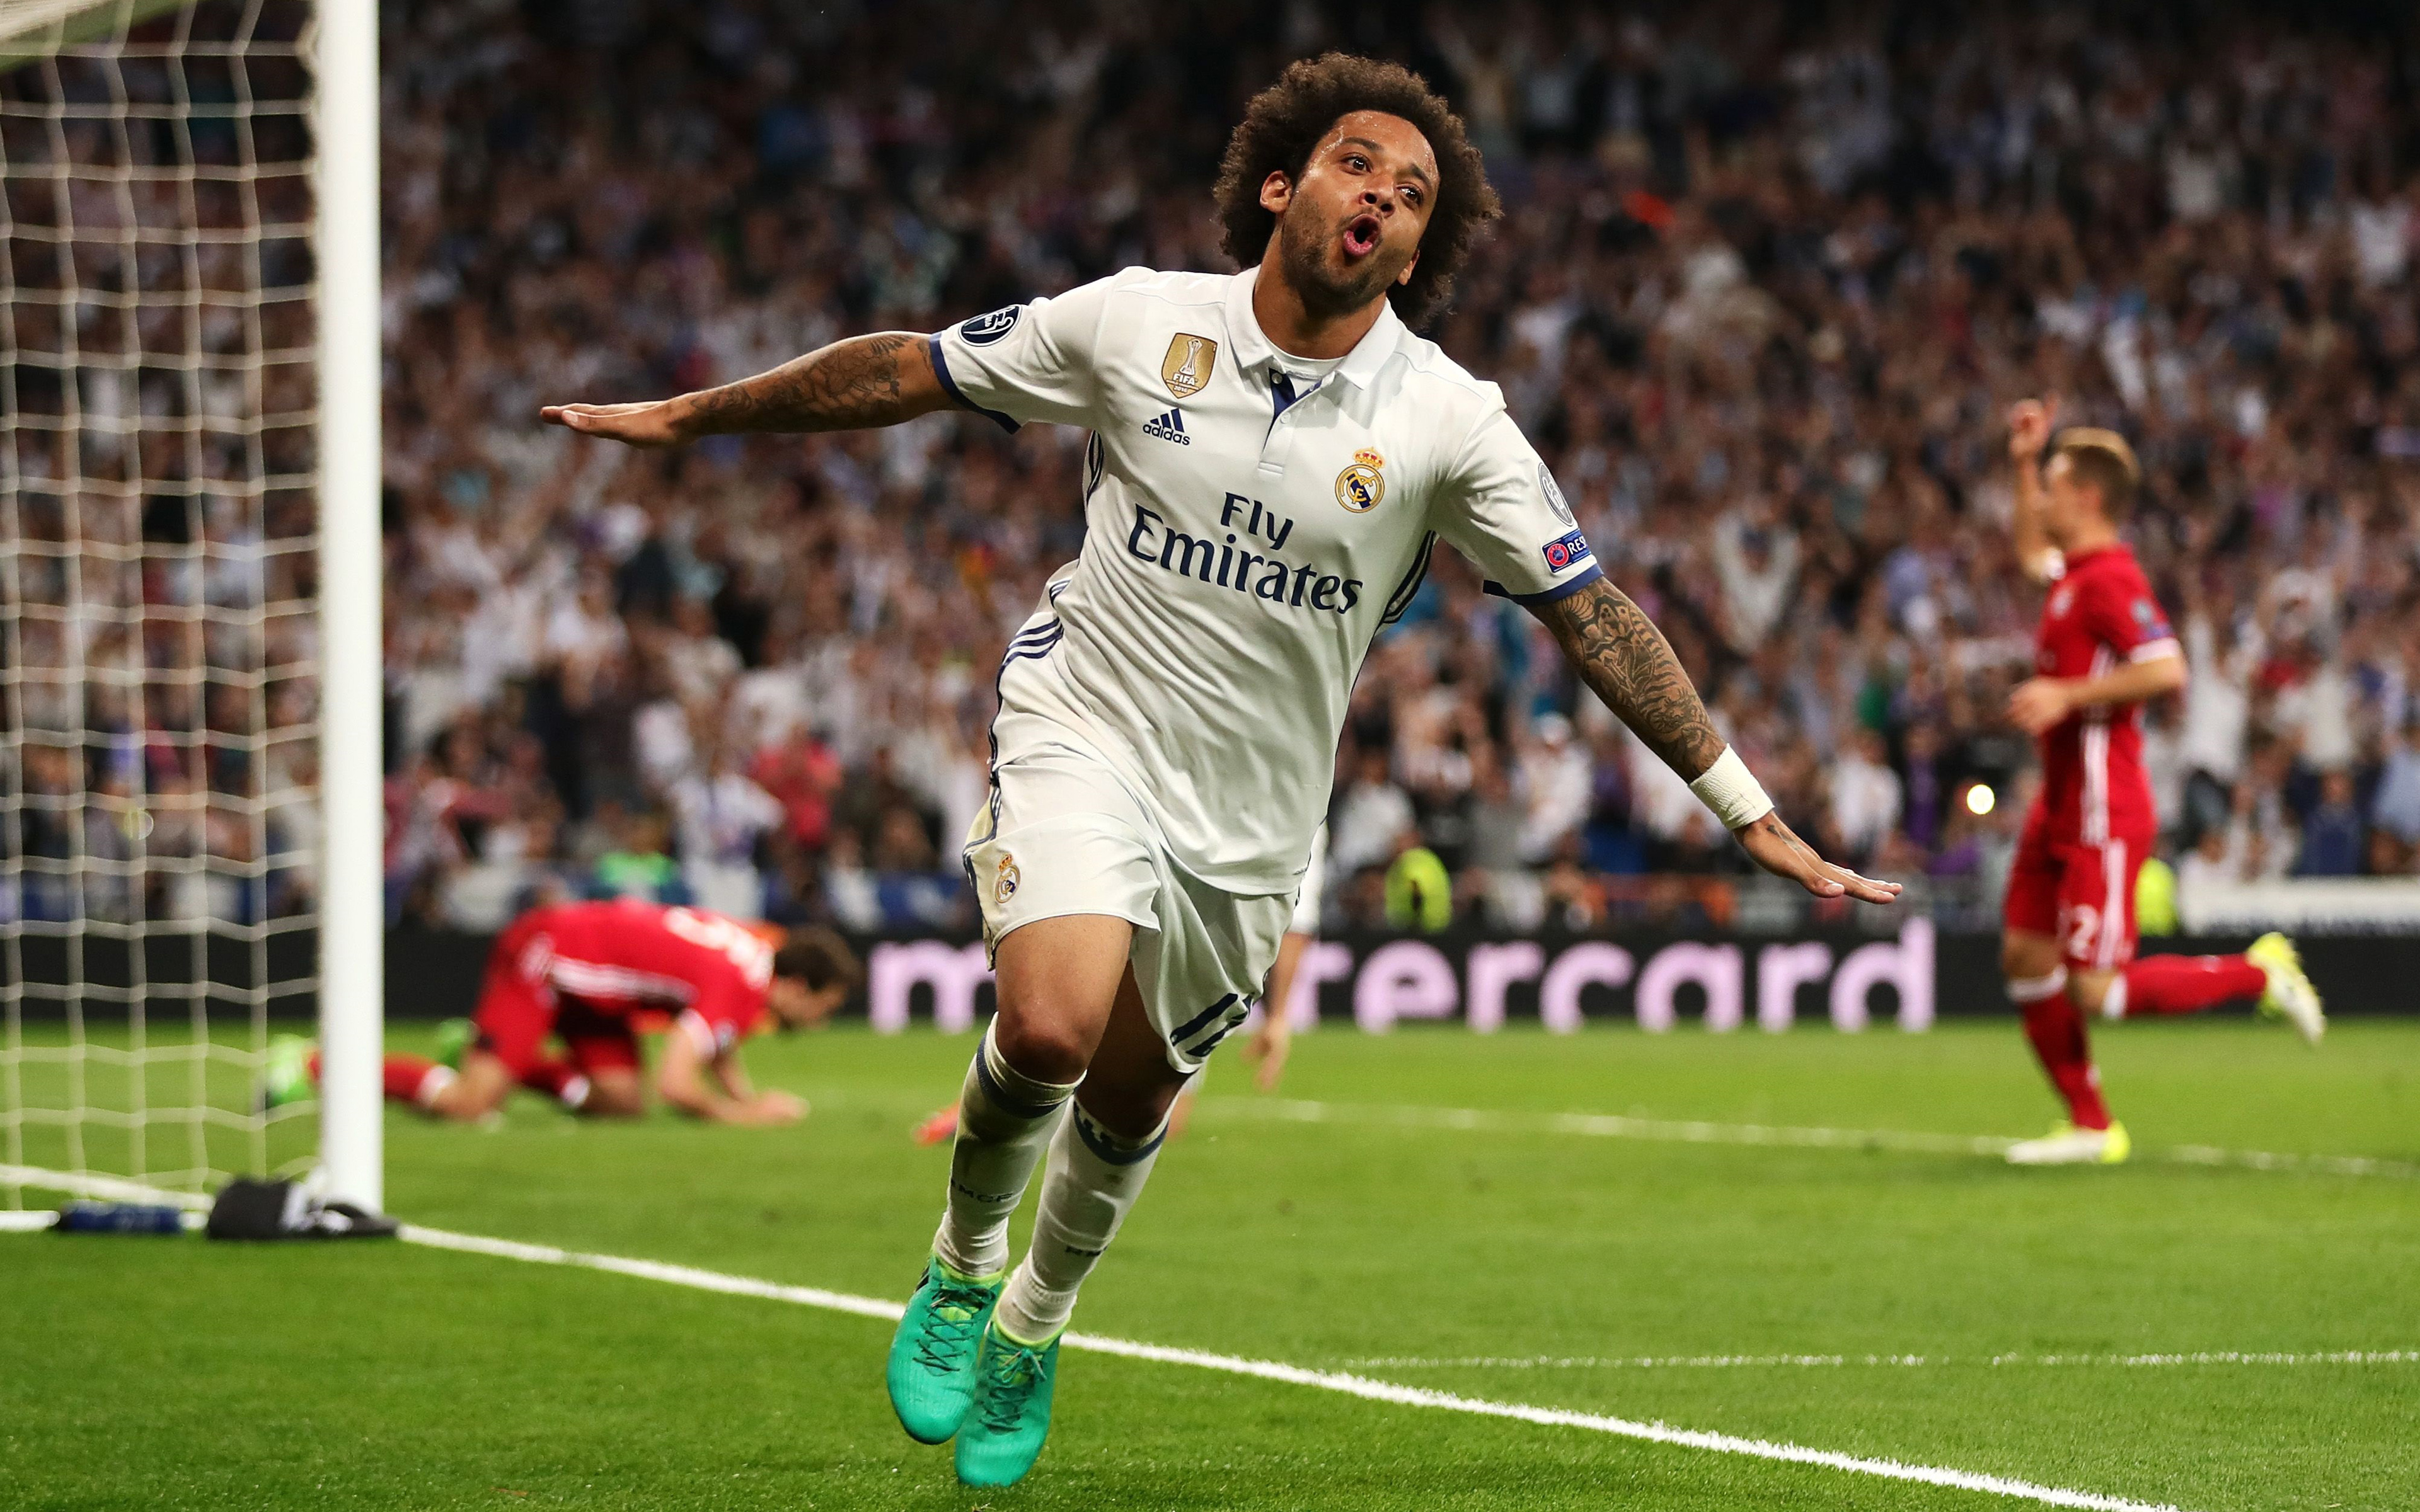 sports, marcelo vieira, real madrid c f, soccer